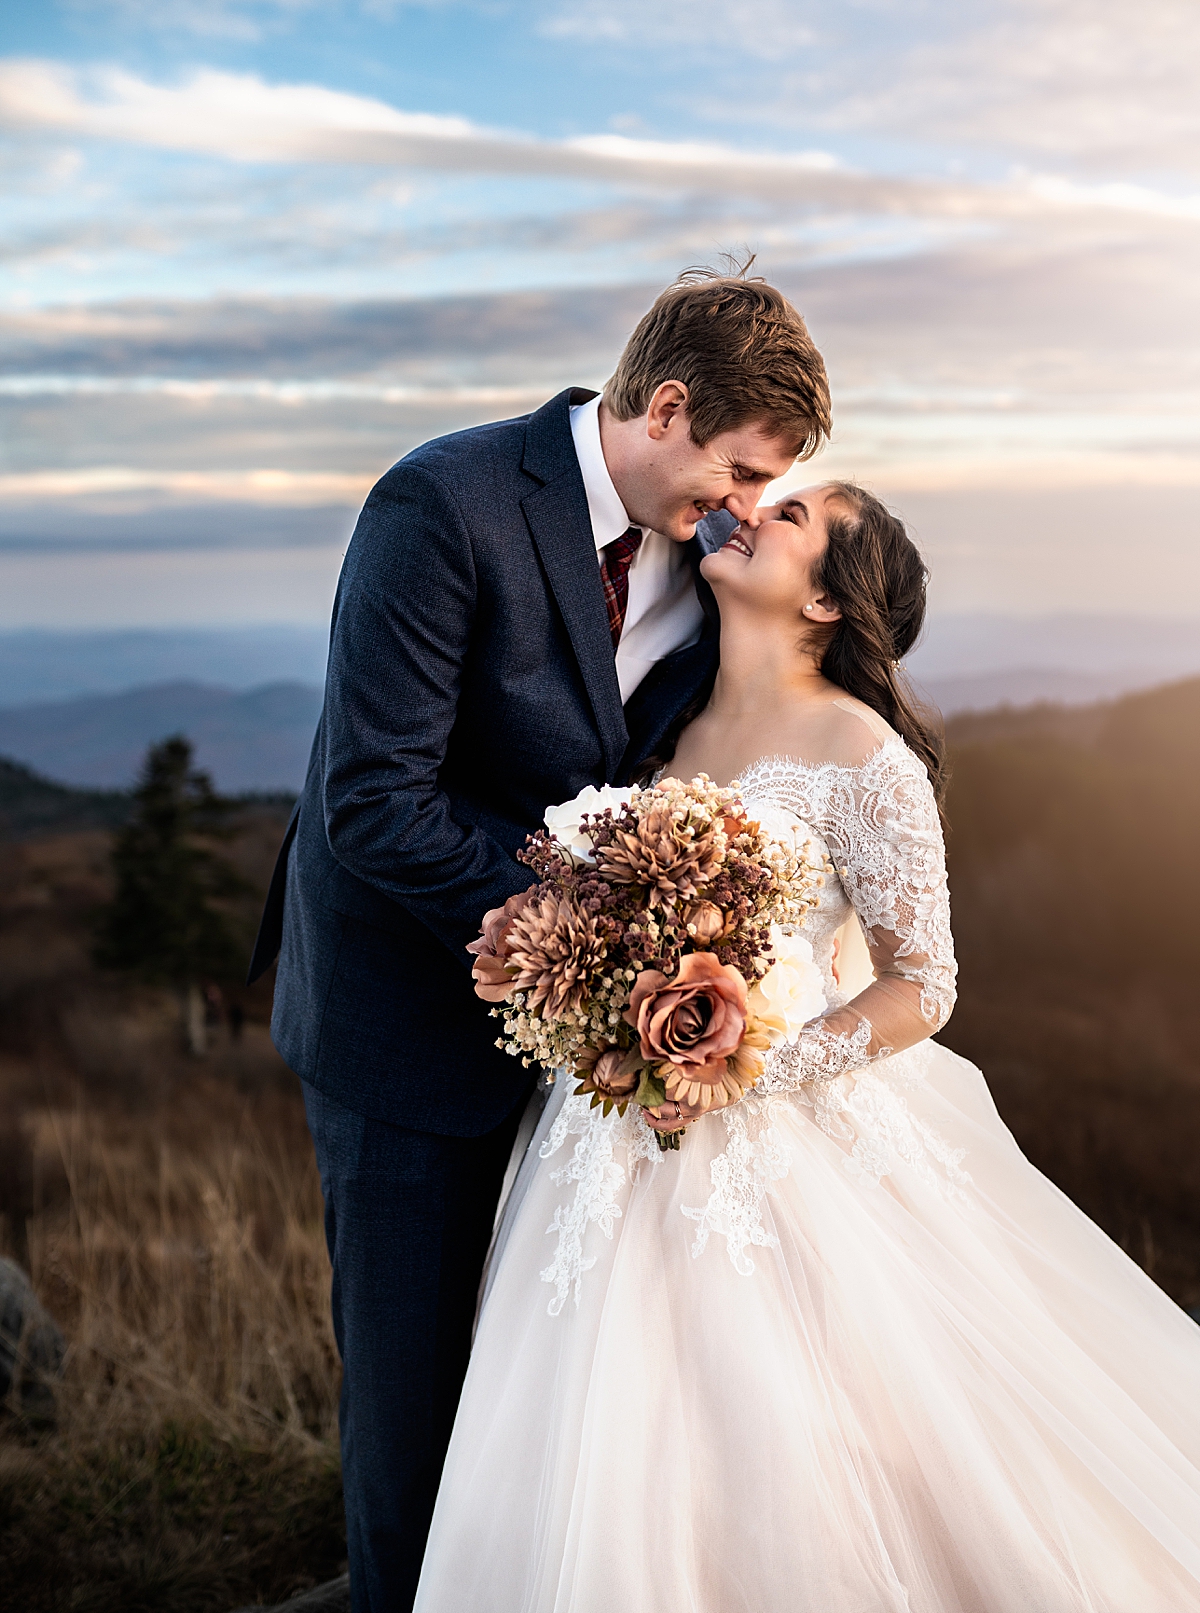 A couple on their wedding day in the mountains of Asheville NC